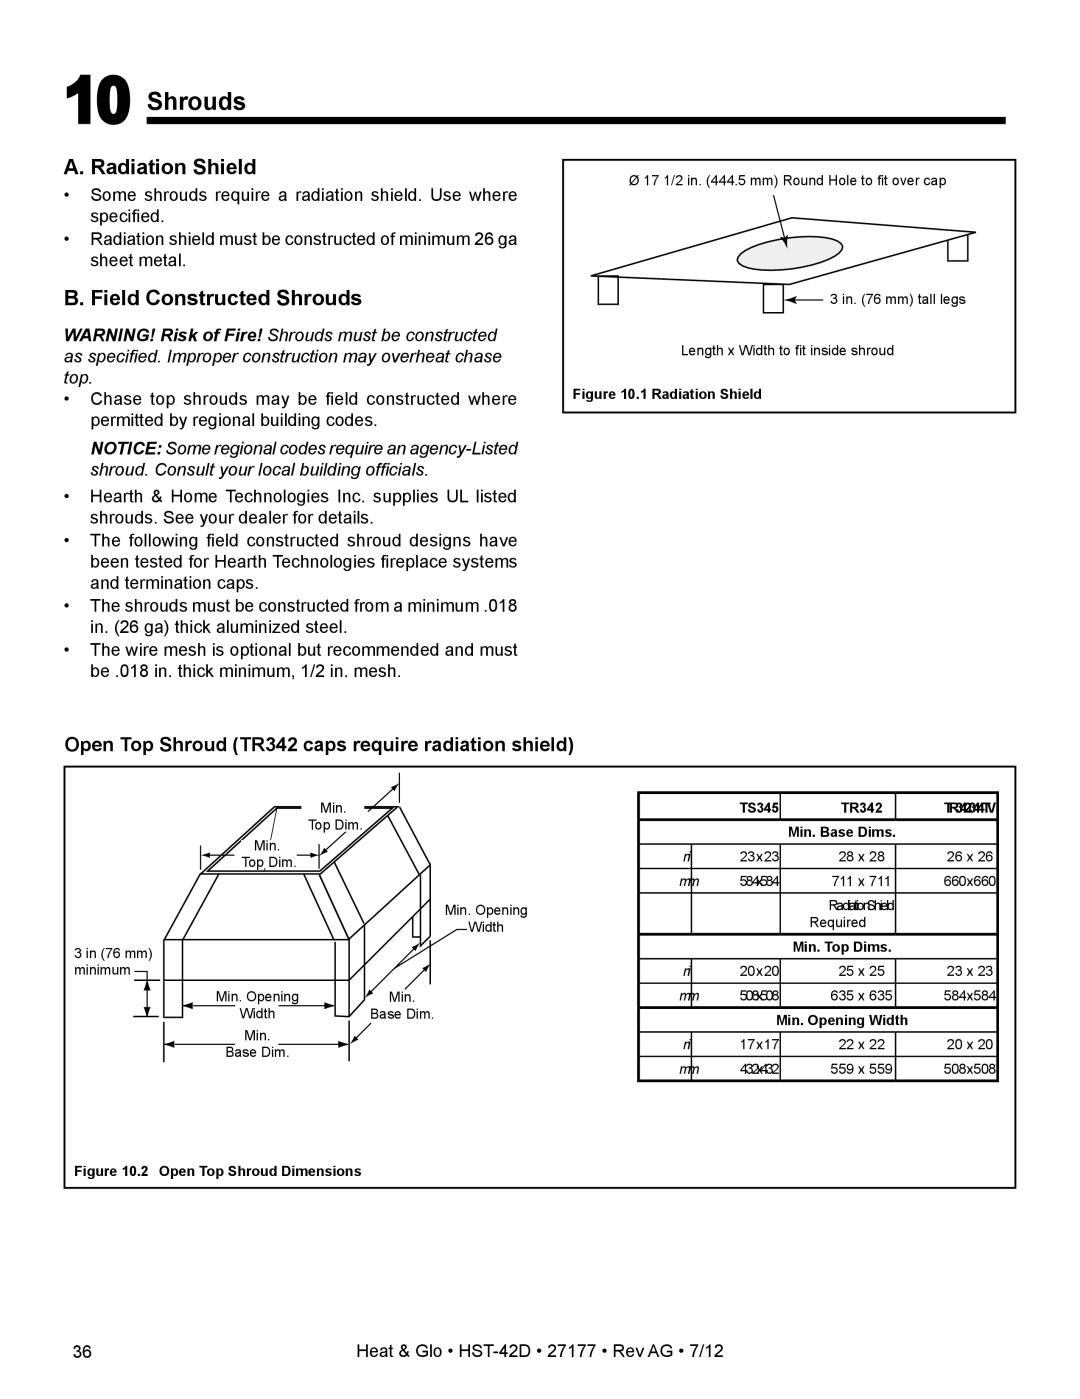 Heat & Glo LifeStyle HST-42D owner manual A. Radiation Shield, B. Field Constructed Shrouds 